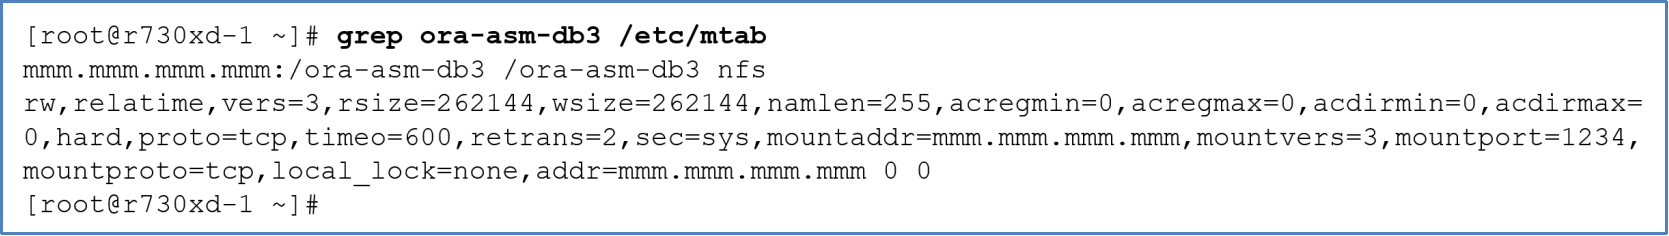 This diagram shows the Linux mount entry in /etc/mtab for the file system which is serviced by the Unity NAS server that is part of the Unity system mentioned in figurr 28.